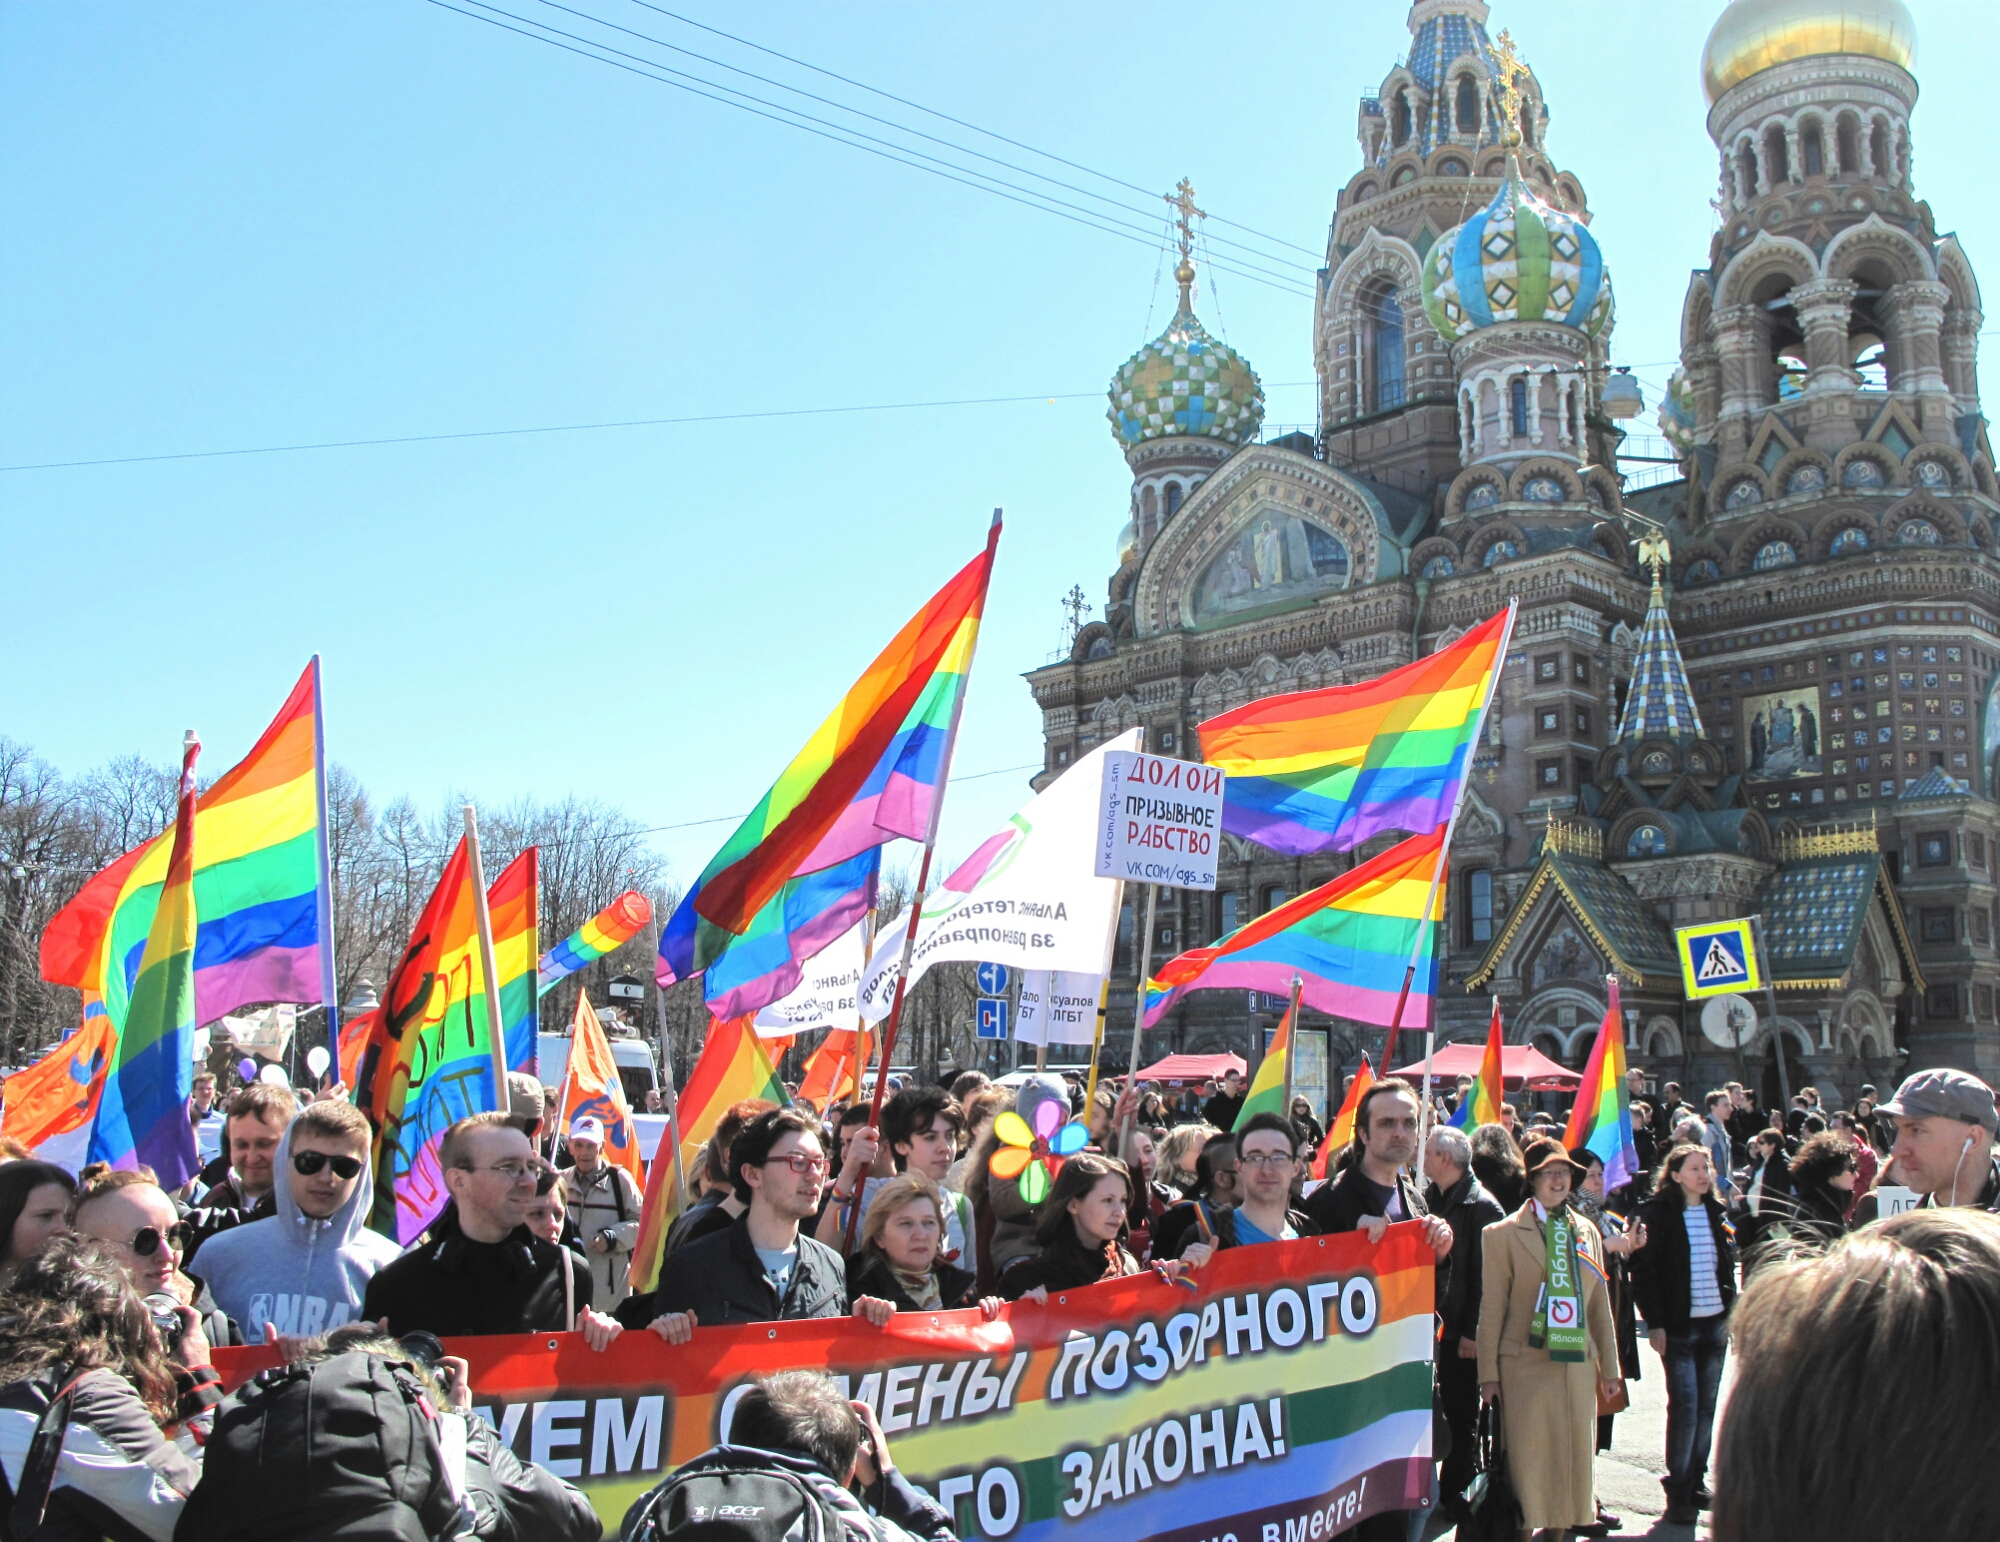 Protest in Russia over making homosexuality illegal